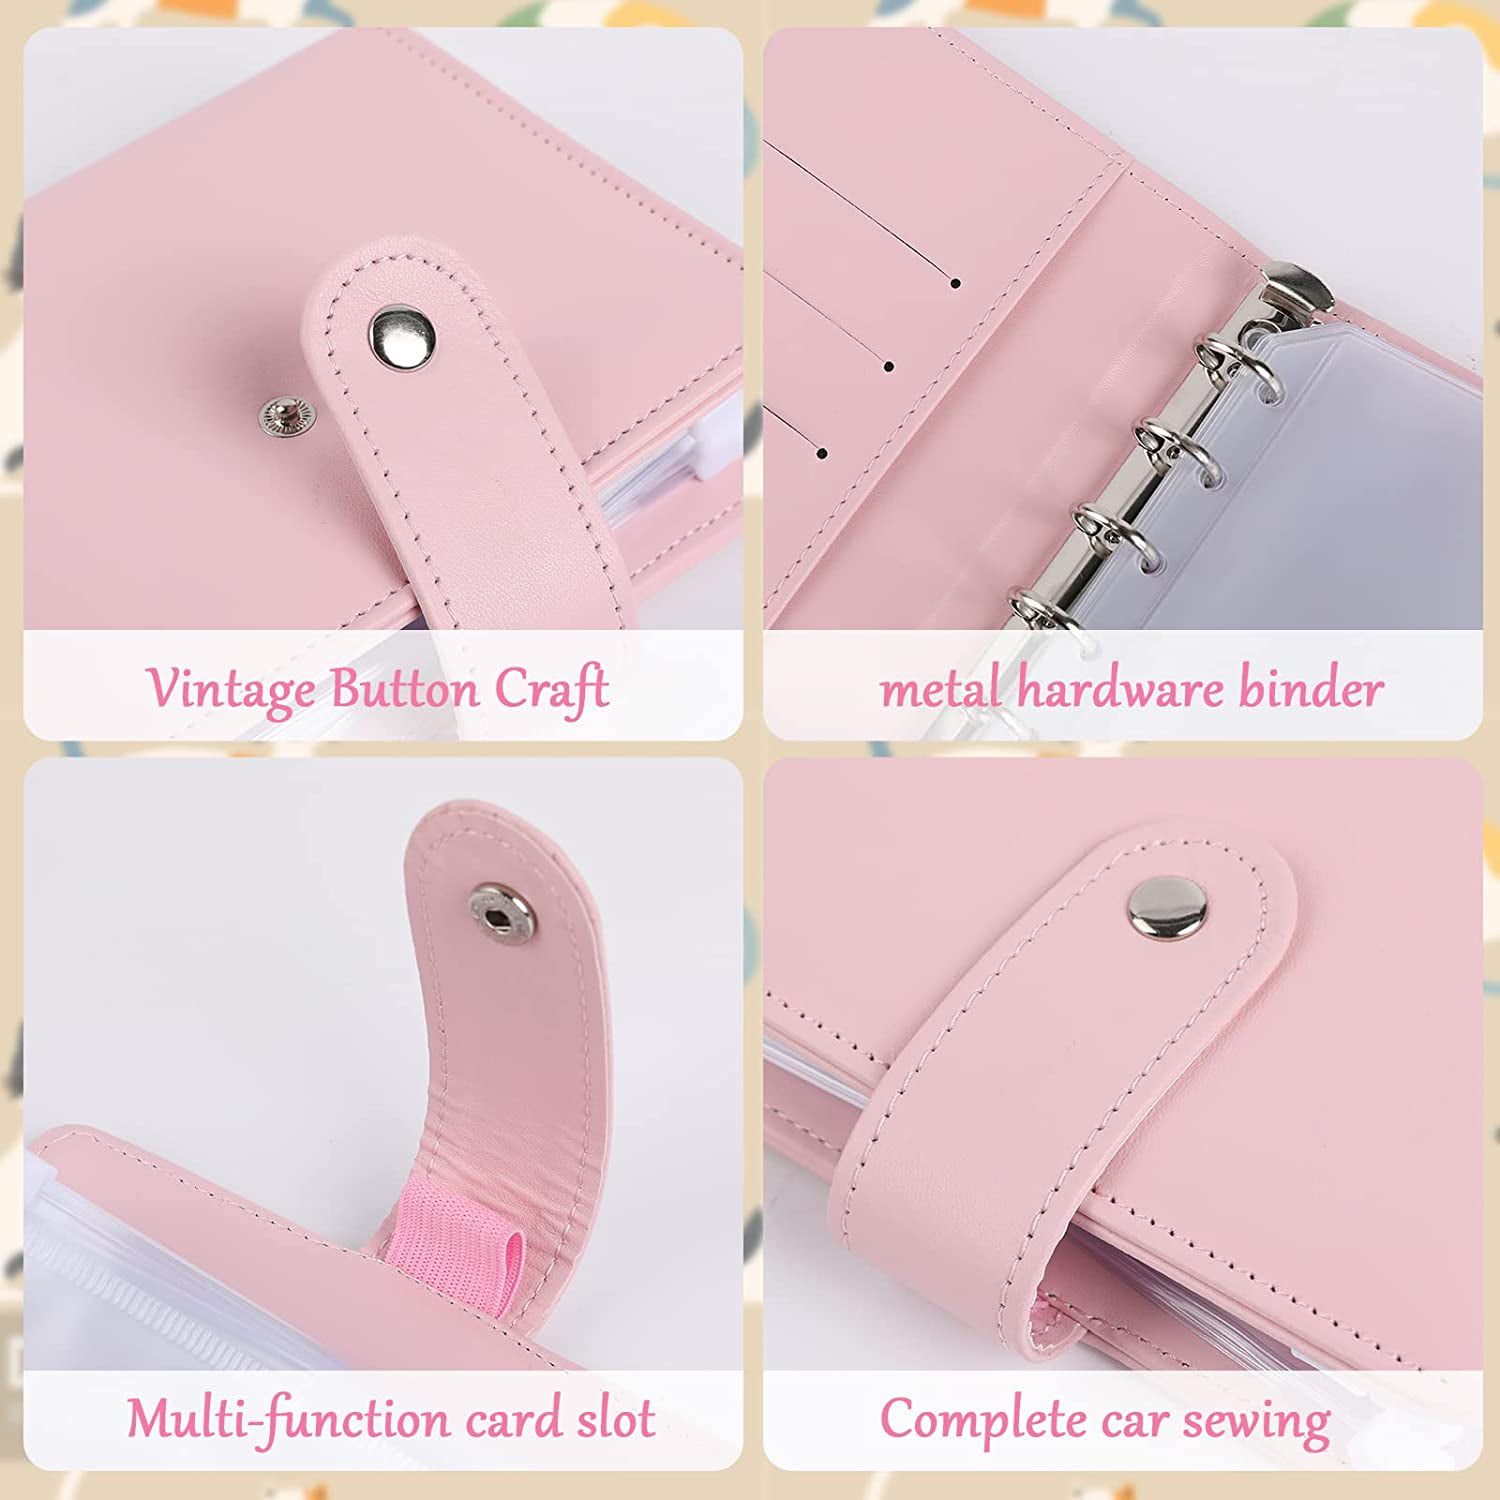 A7 Pu Leather Budget Binder Wallet Accessories Set Lable Stickers